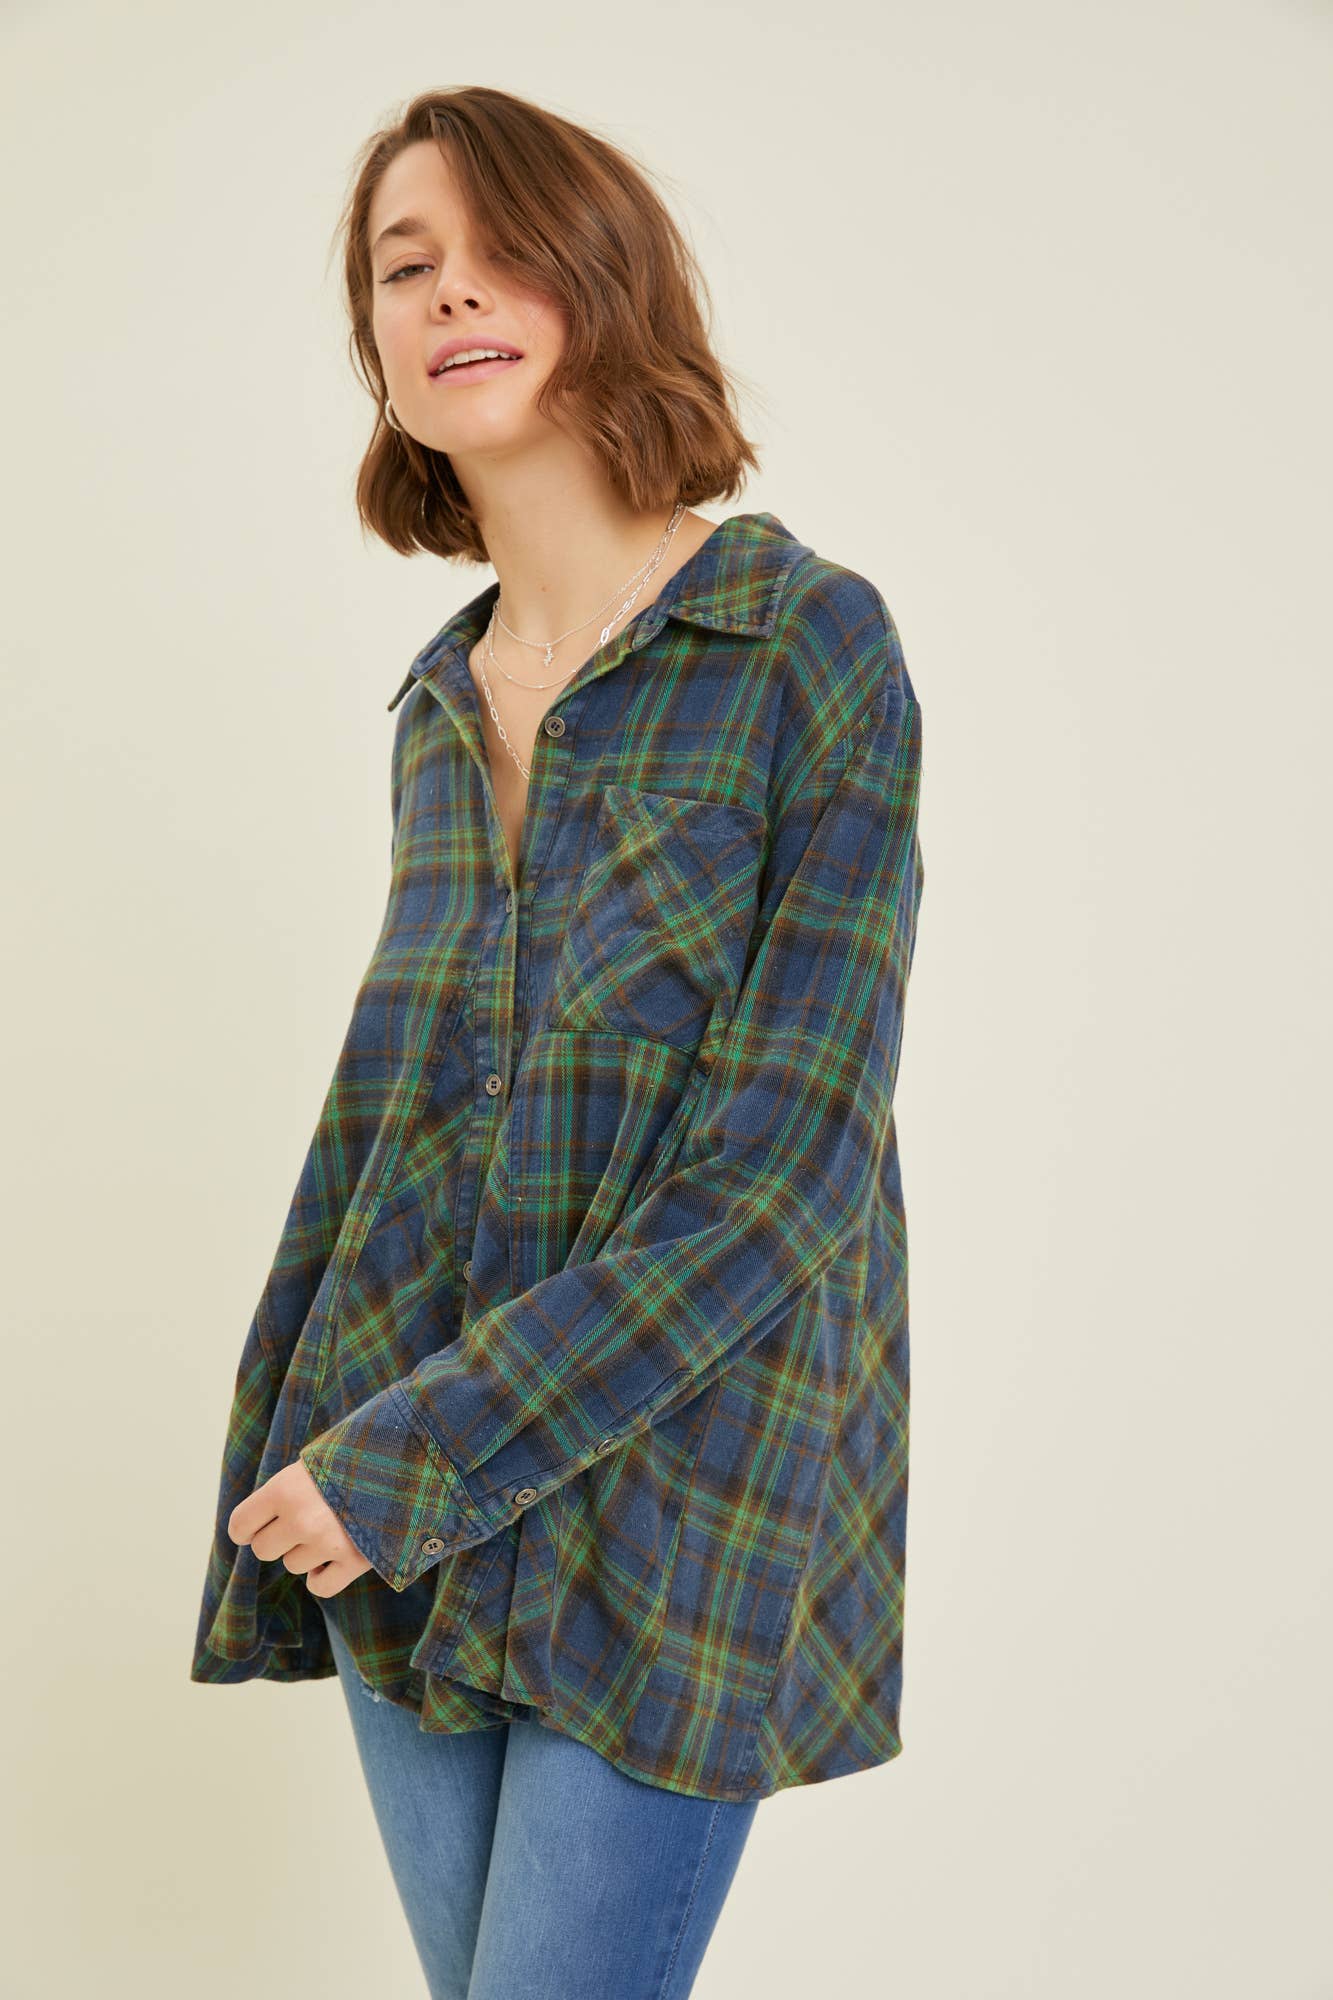 ET1596 WESTERN WASHED PLAID SHIRT: M / RED